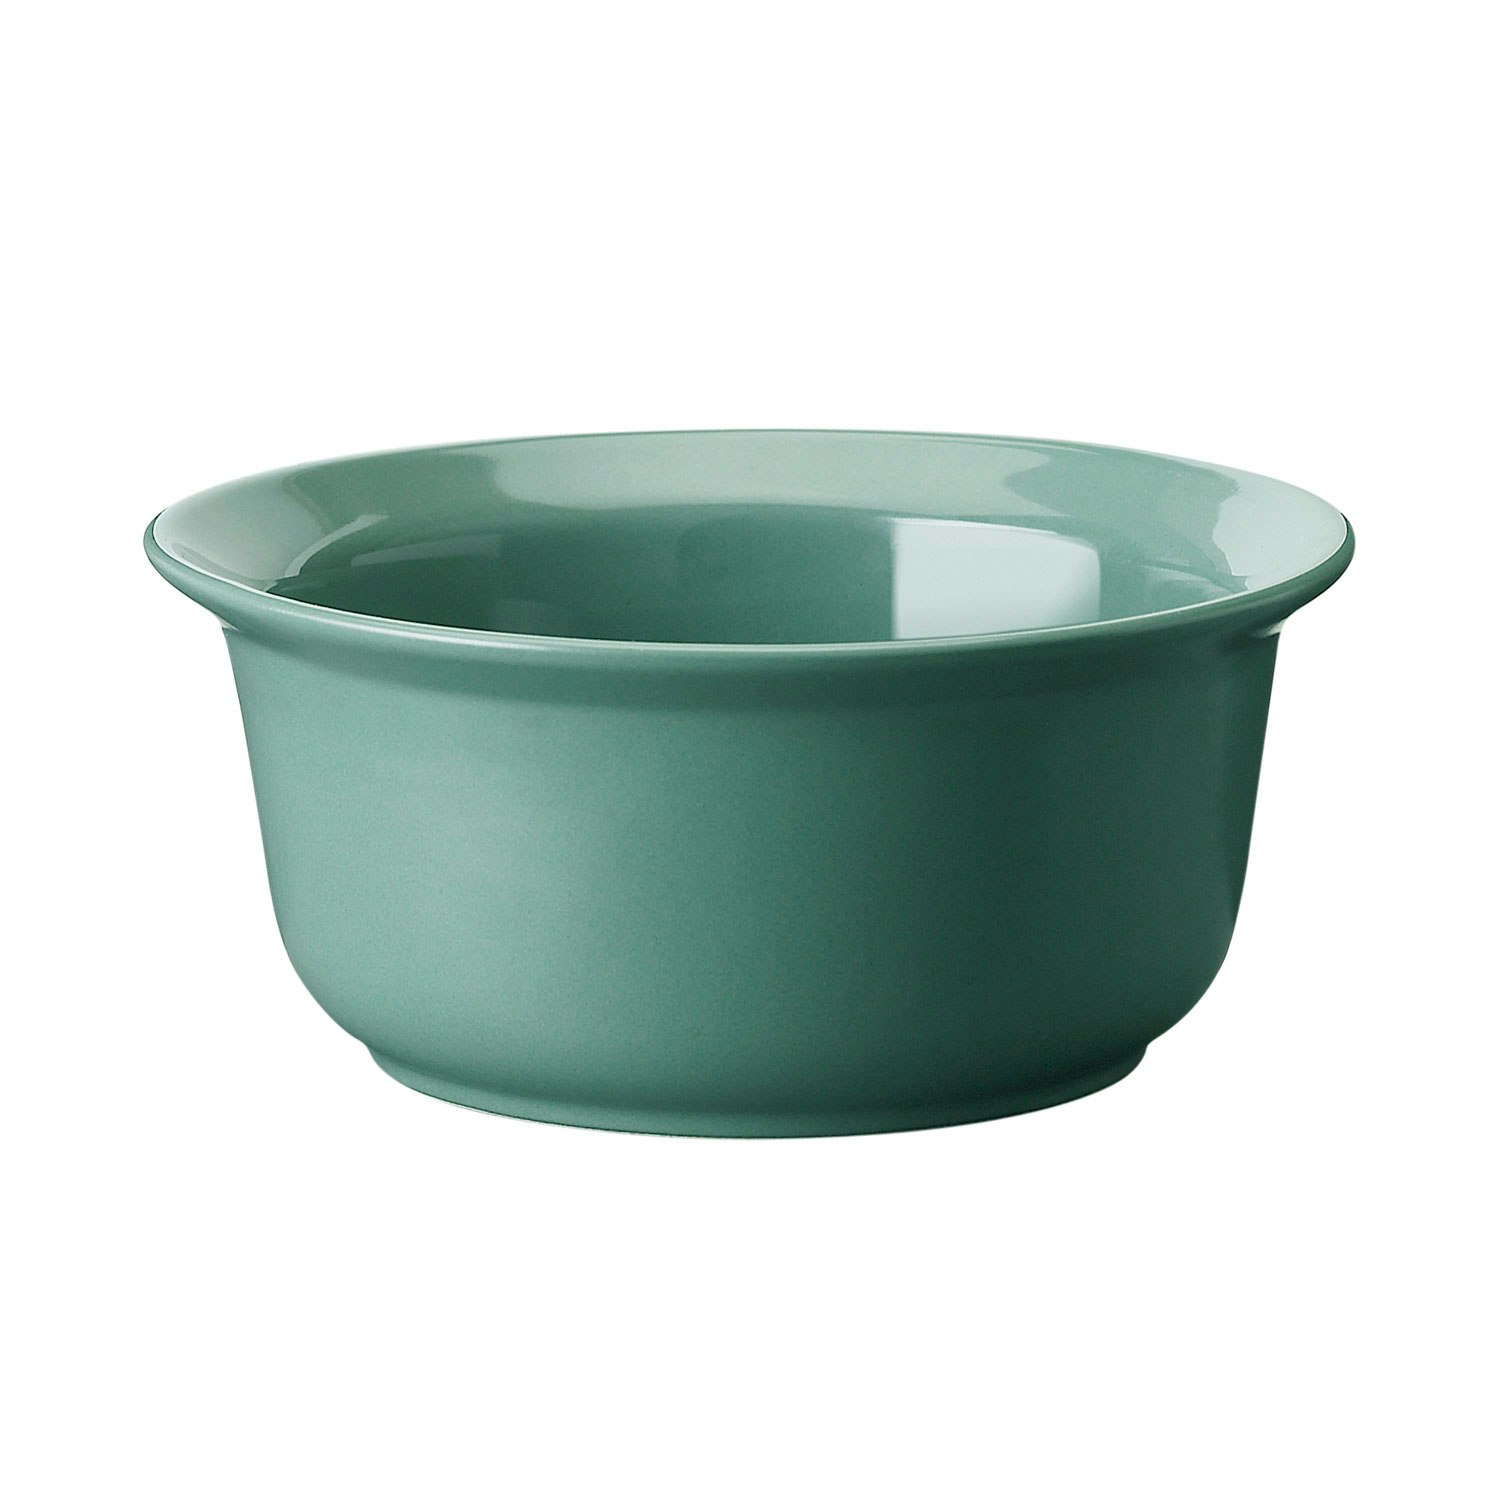 Melamine Mixing Bowl Set -Red/Blue/Green, 1 count - Pay Less Super Markets